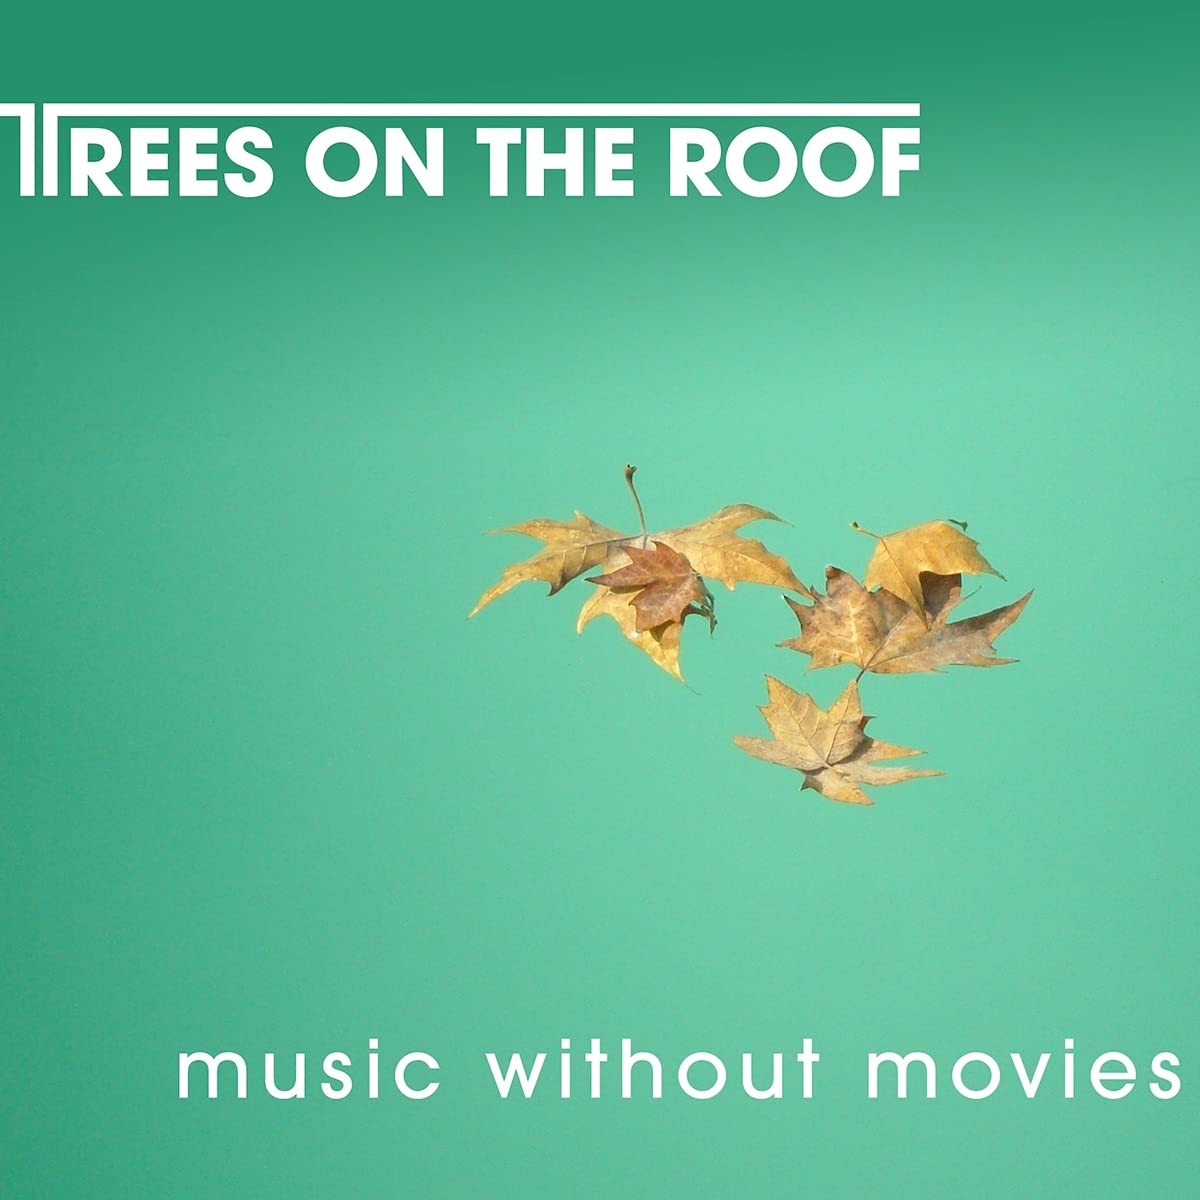 Trees on the Roof: Music without movies